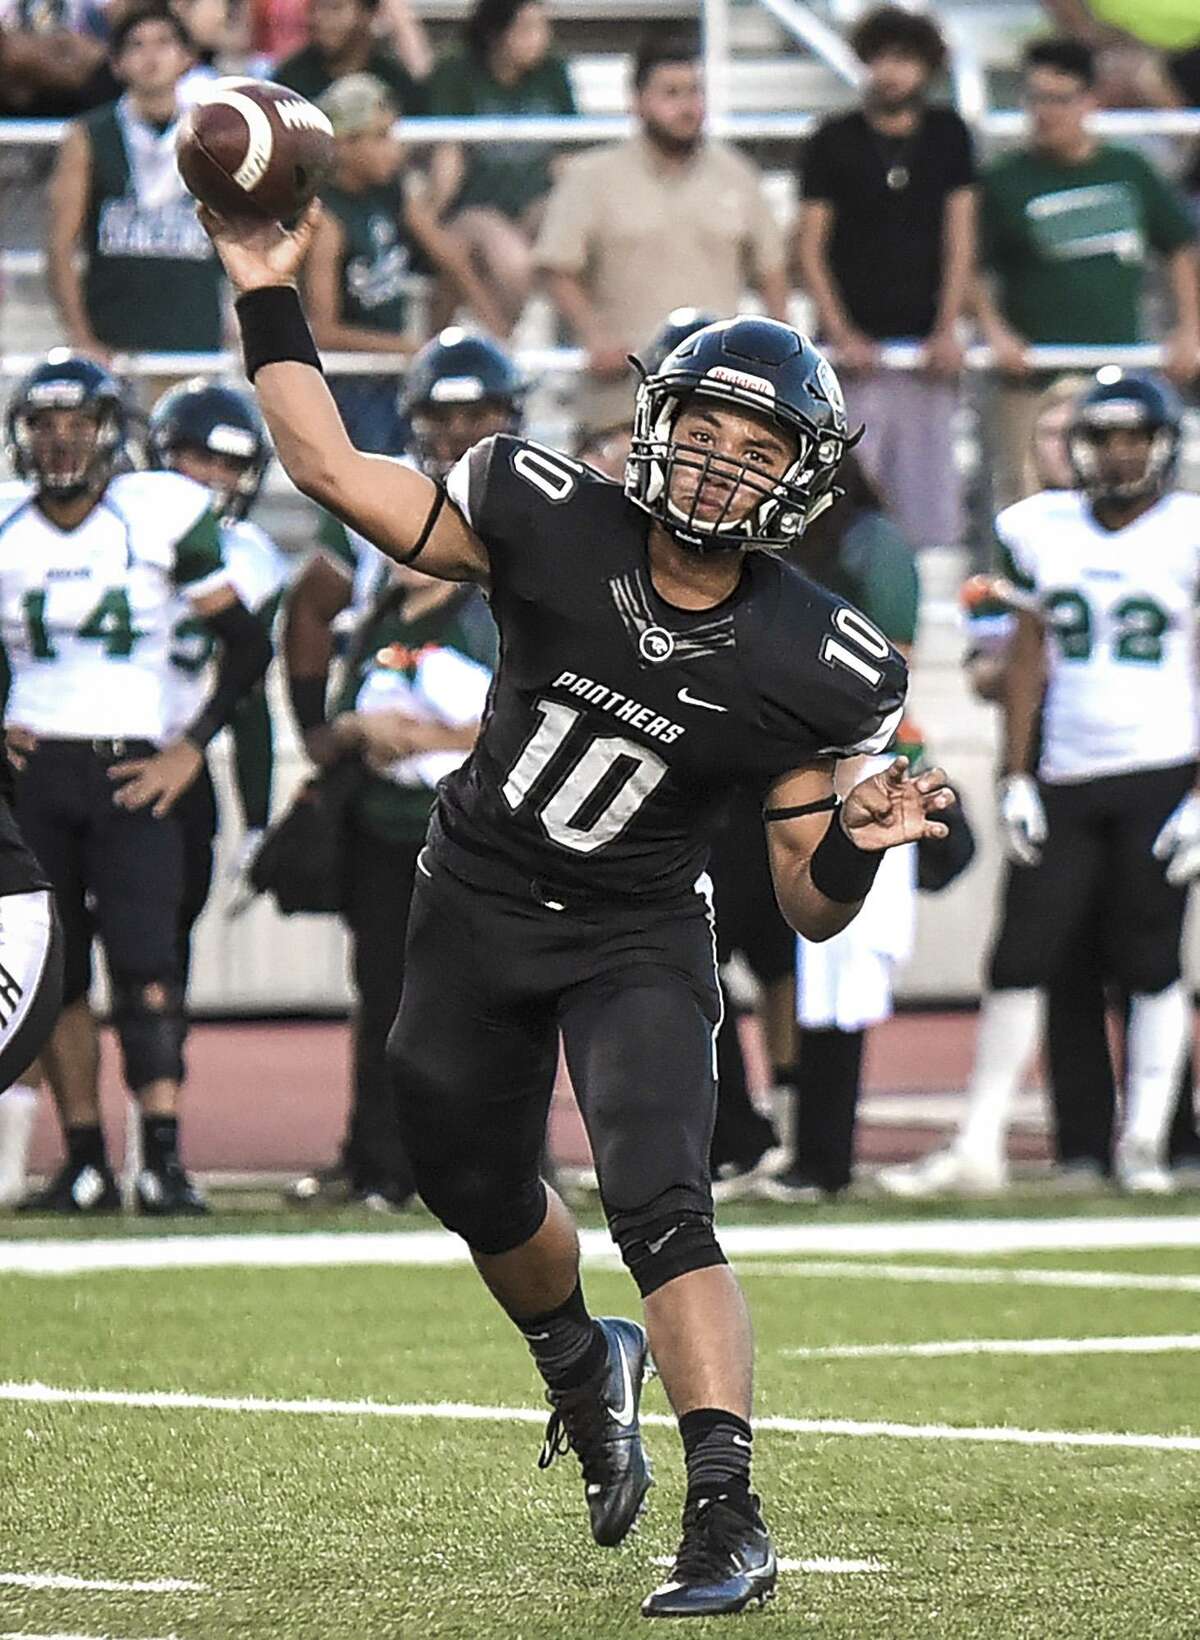 Senior quarterback Ismael Contreras and United South host San Antonio Wagner at 7 p.m. Thursday at the SAC to open the 2017 season.